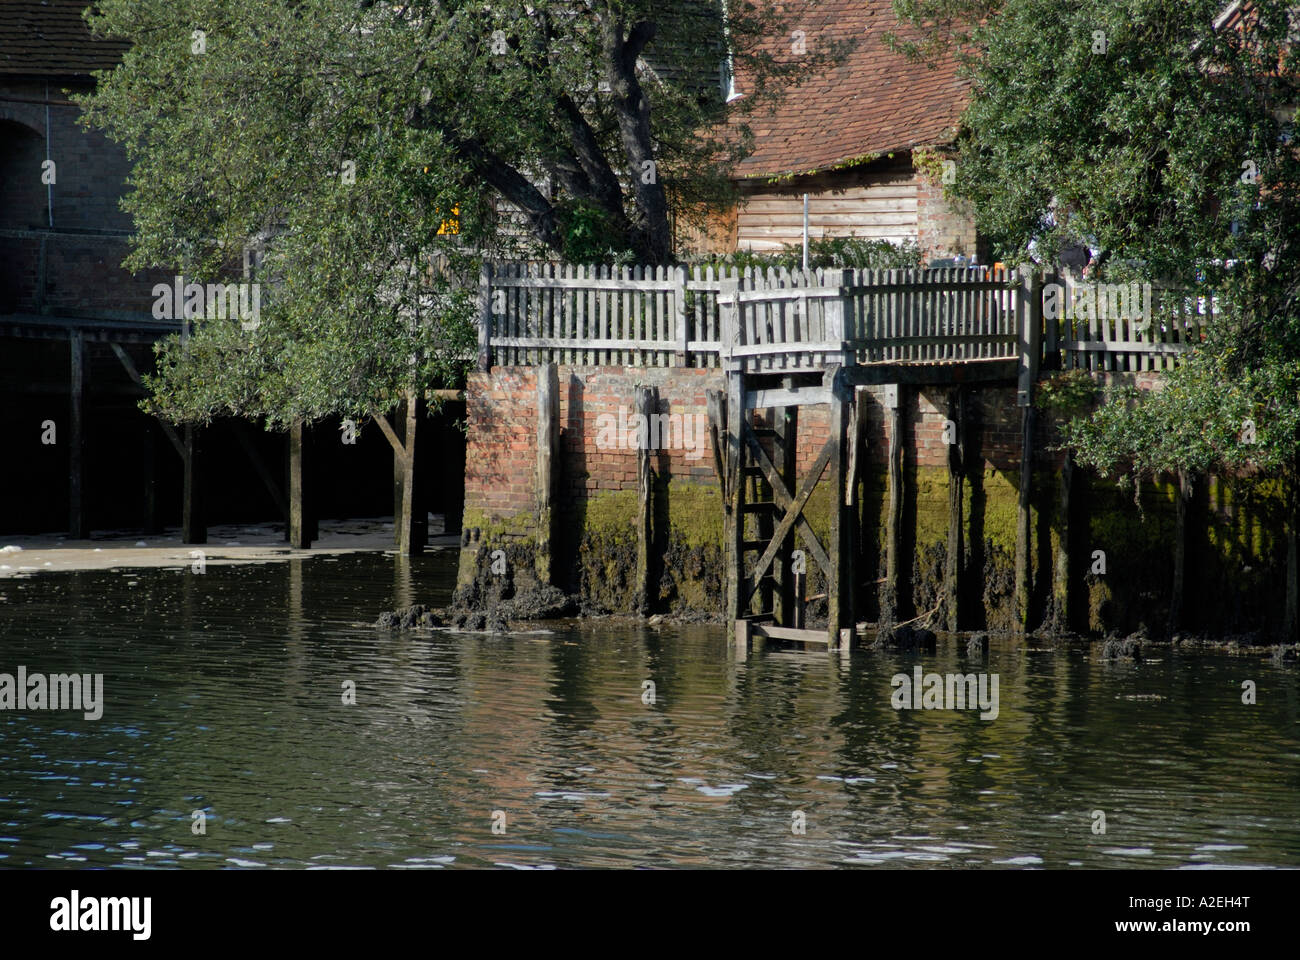 Small wooden jetty attached to the back of a house on the Beaulieu River Beaulieu Hampshire England UK 08 September 2006 Stock Photo